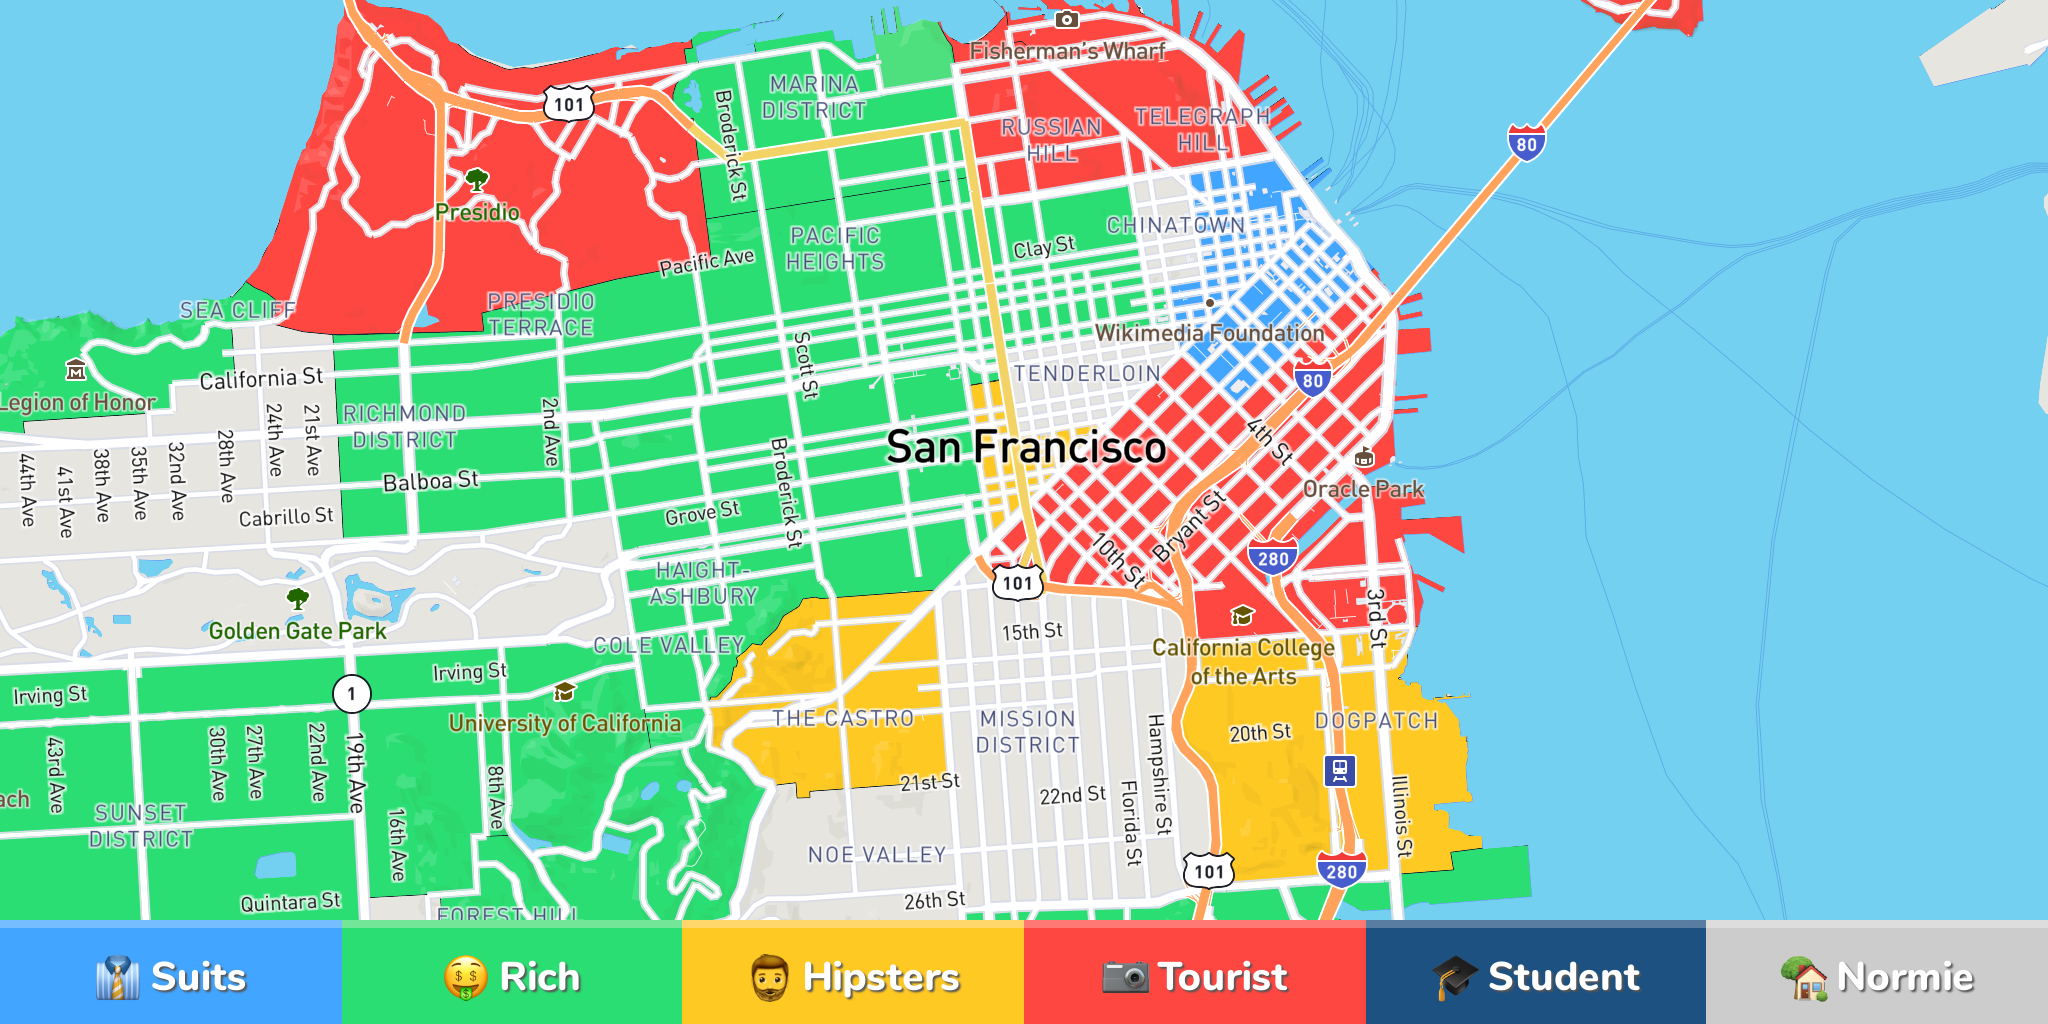 San Francisco Neighborhood Map: Civic Center: Kinky, Tenderloin: Homeless junkies, Western Addition: Japan, Union Square: No-go zone, Mission: Front-l